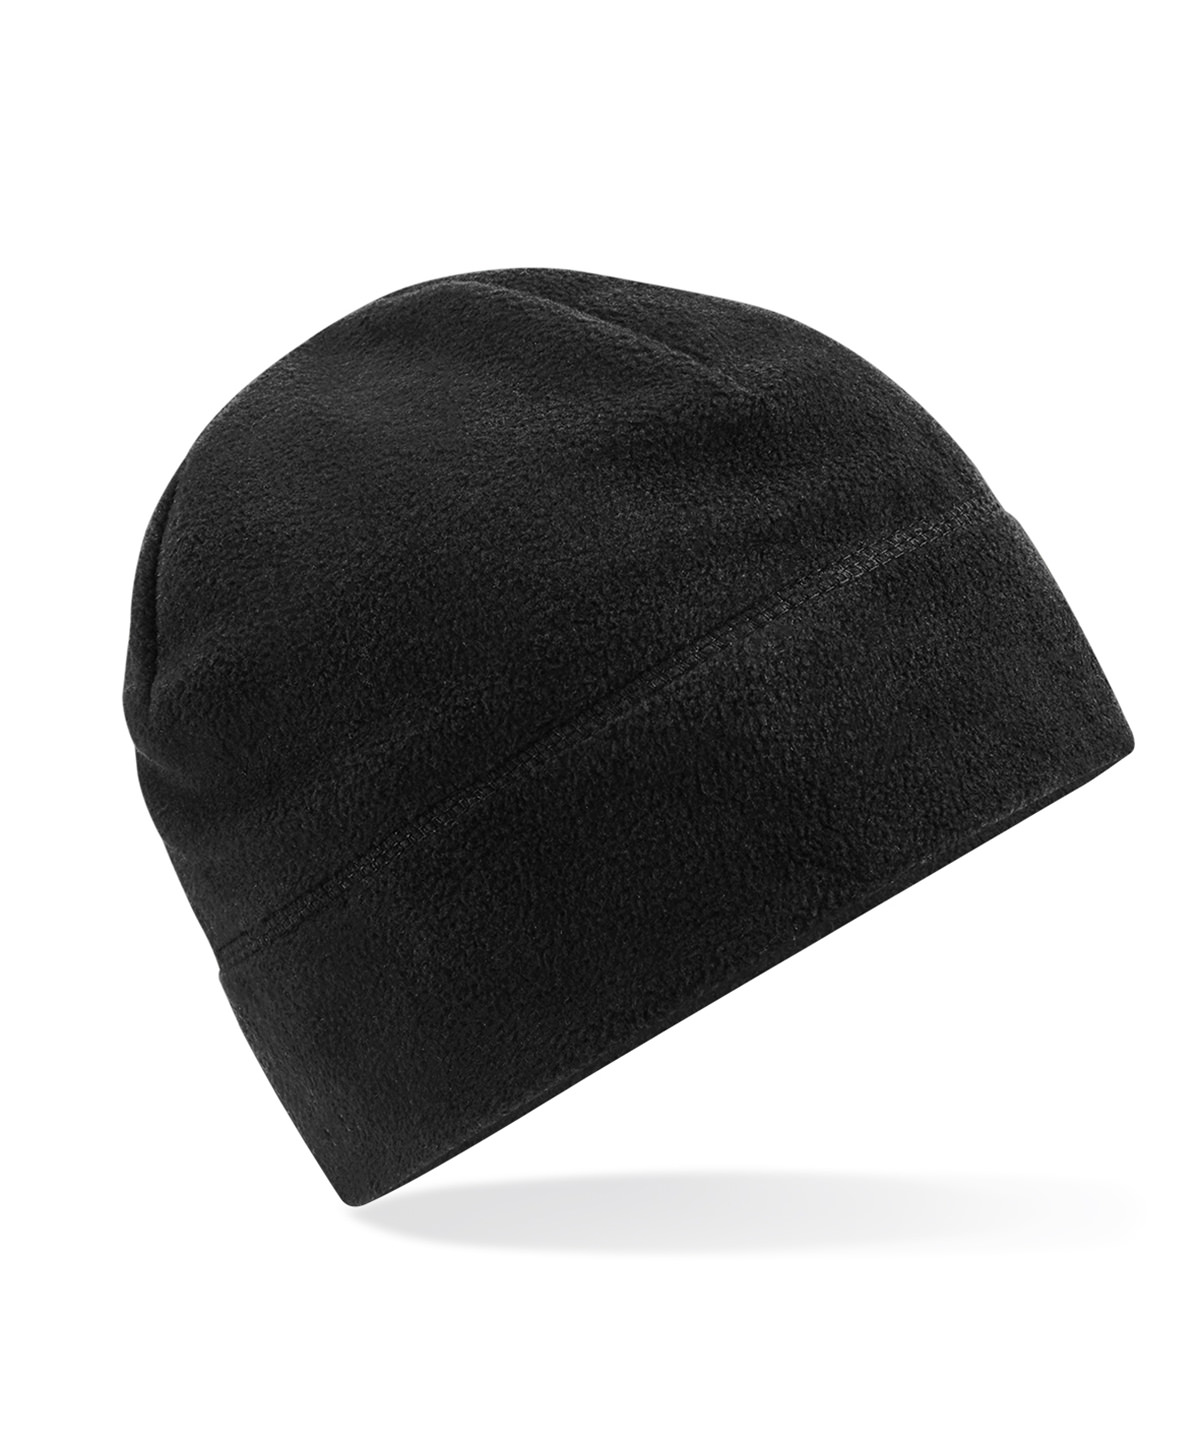 Recycled Fleece Pull-On Beanie Black Size One Size